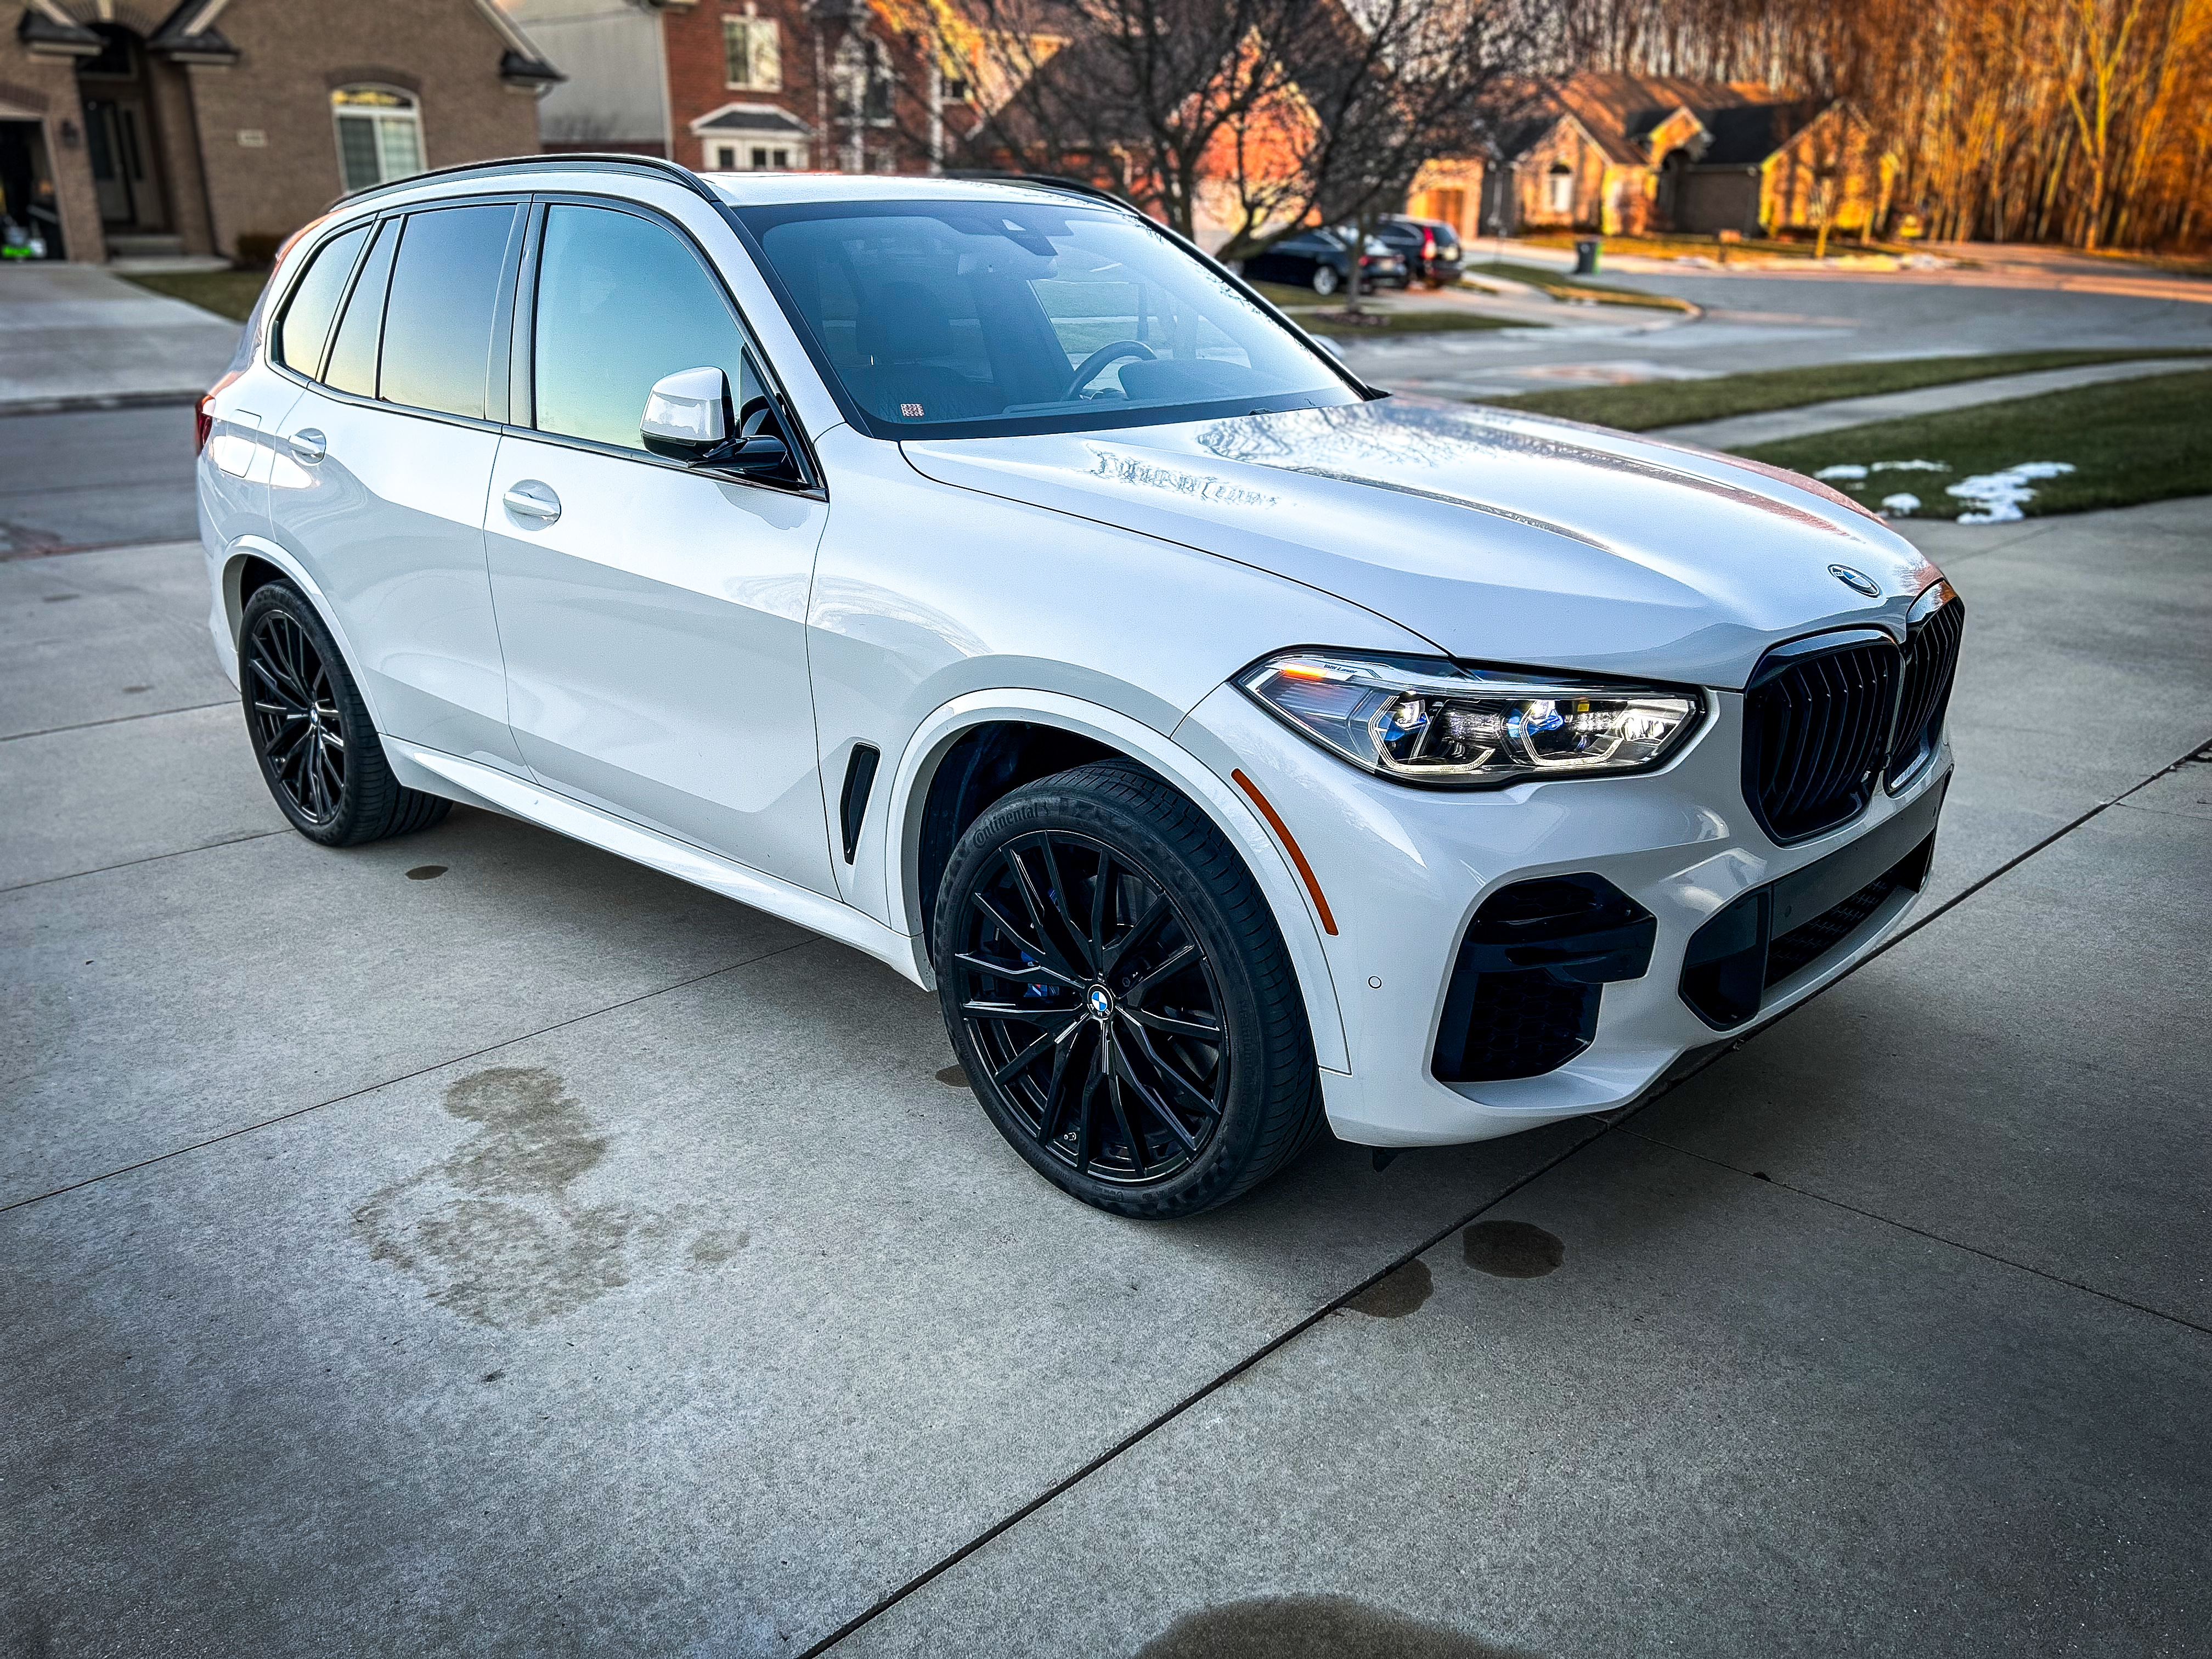 Used 2022 BMW X5 M50i for Sale Right Now - Autotrader